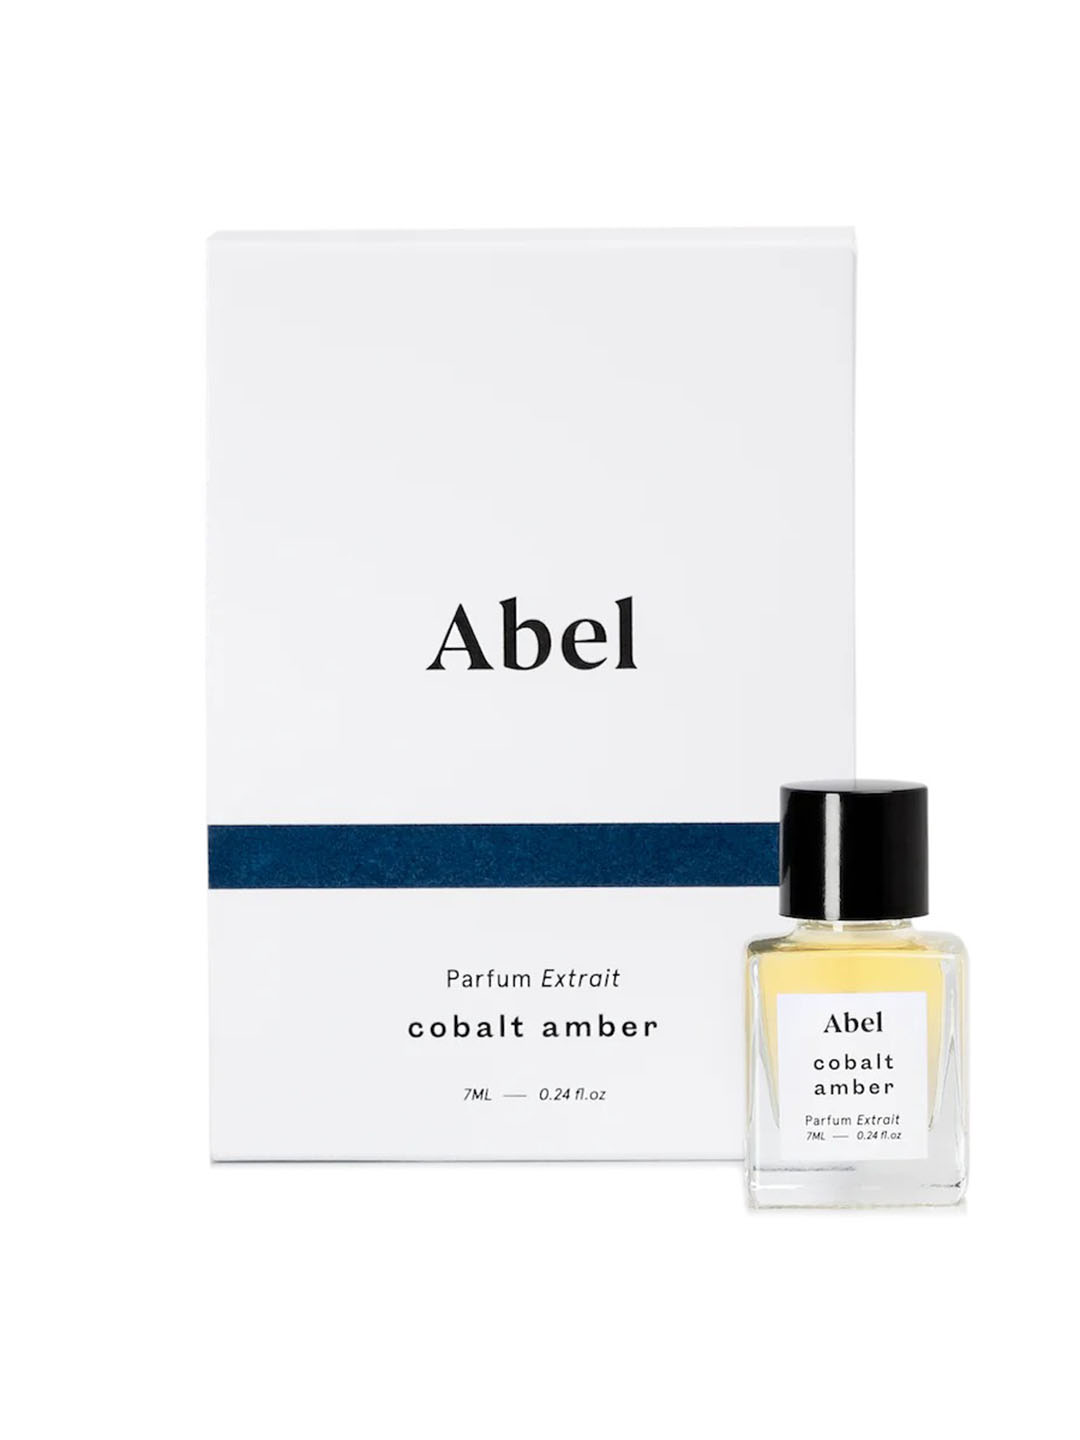 An Abel Cobalt Amber Parfum Extrait – for comfort with a natural scent in front of a box.